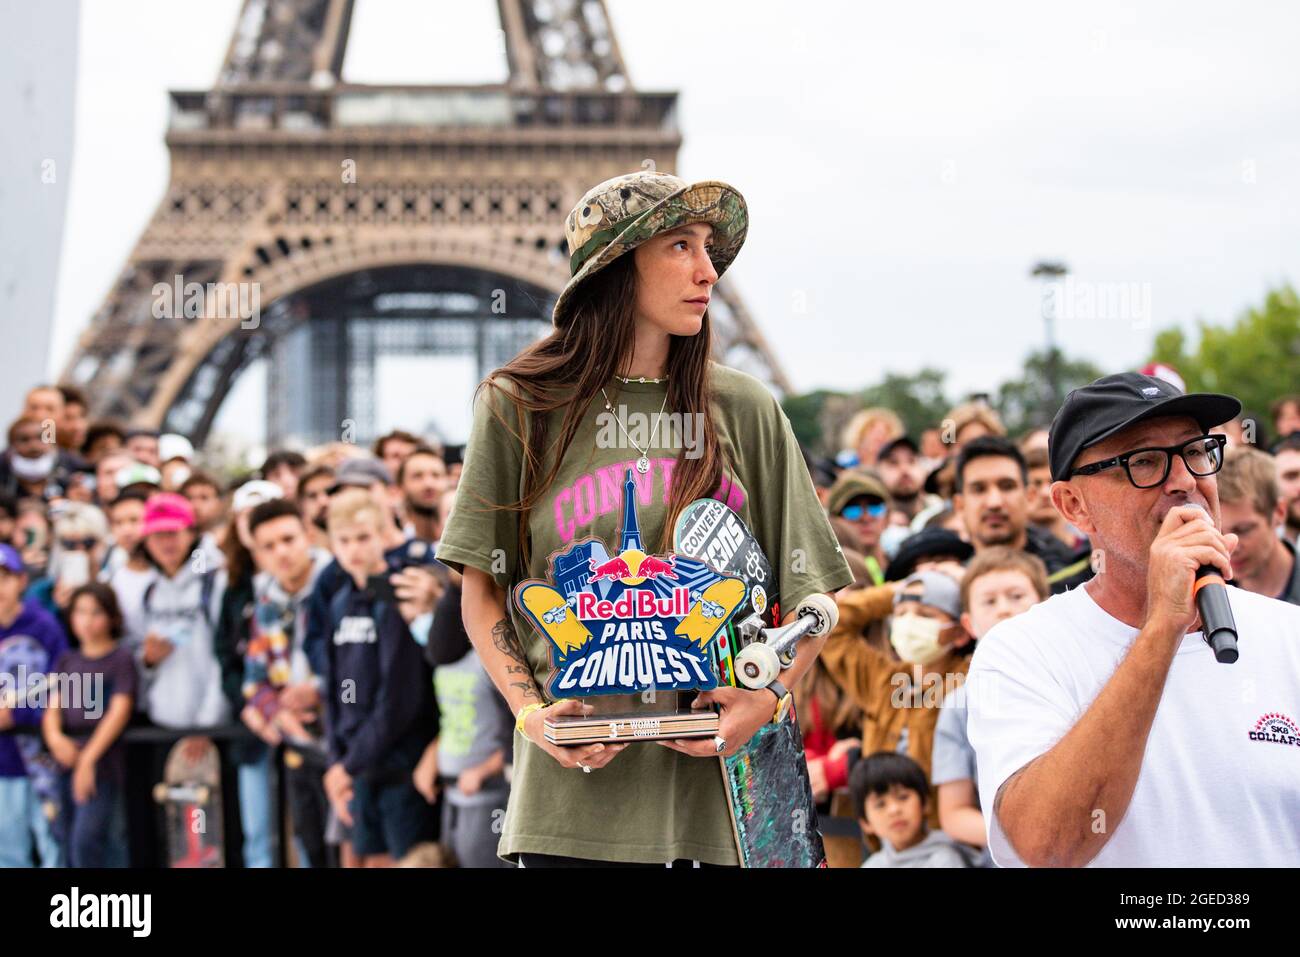 https://c8.alamy.com/comp/2GED389/eugenia-ginepro-celebrates-after-the-2021-red-bull-paris-conquest-on-august-18-2021-at-trocadero-place-in-paris-france-photo-antoine-massinon-a2m-sport-consulting-dppi-2GED389.jpg